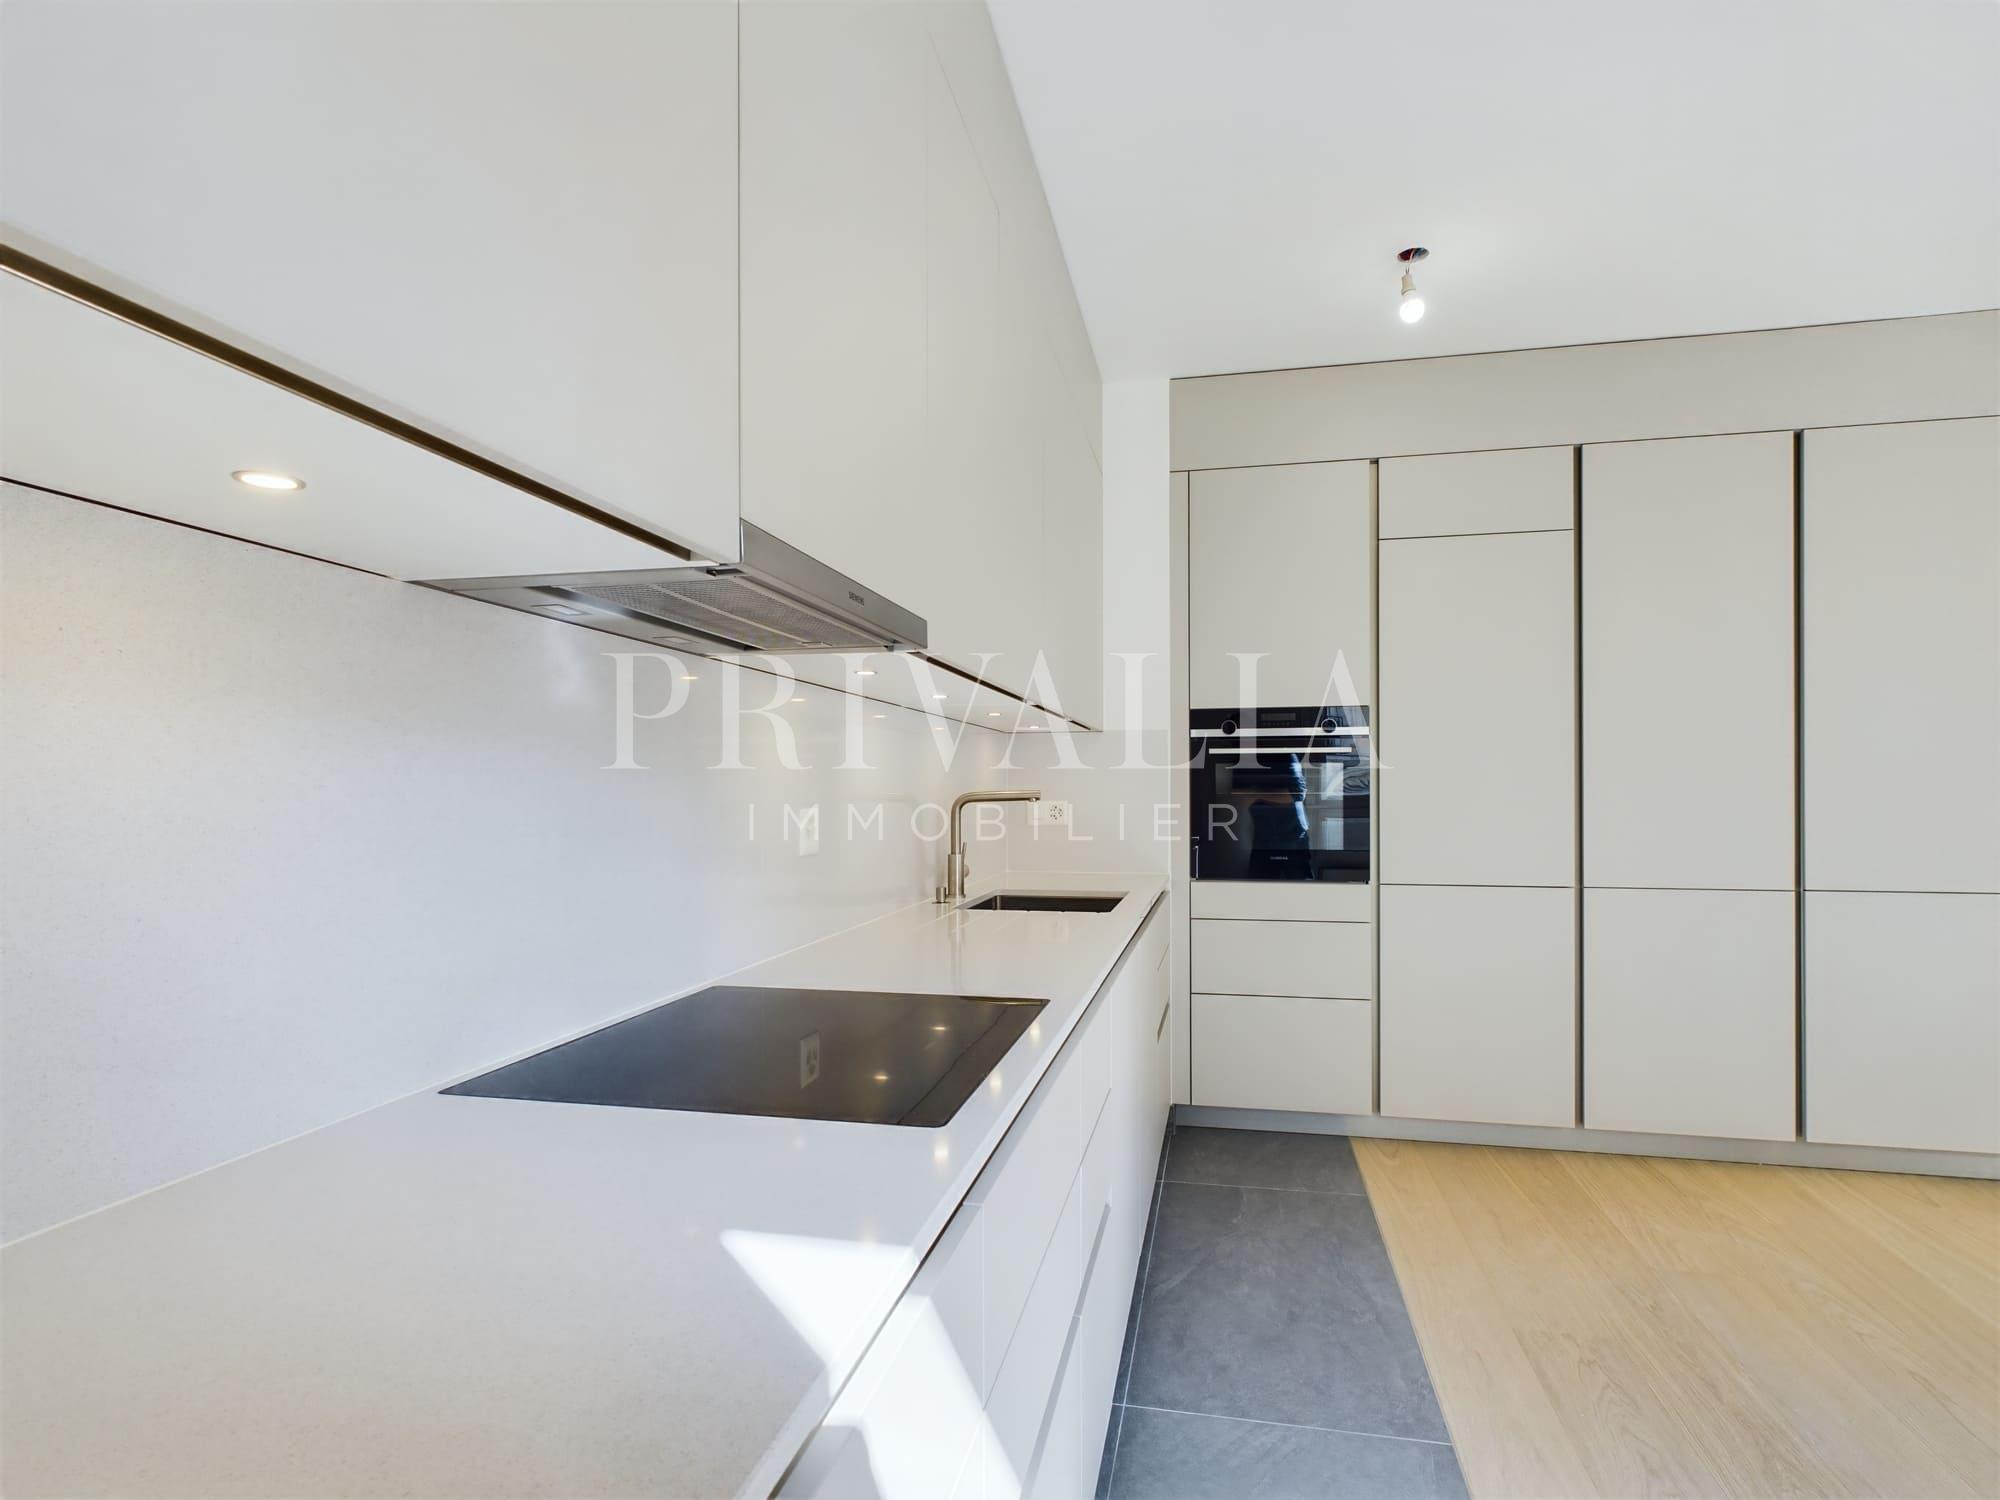 PrivaliaMagnificent contemporary apartment in the heart of the banking district